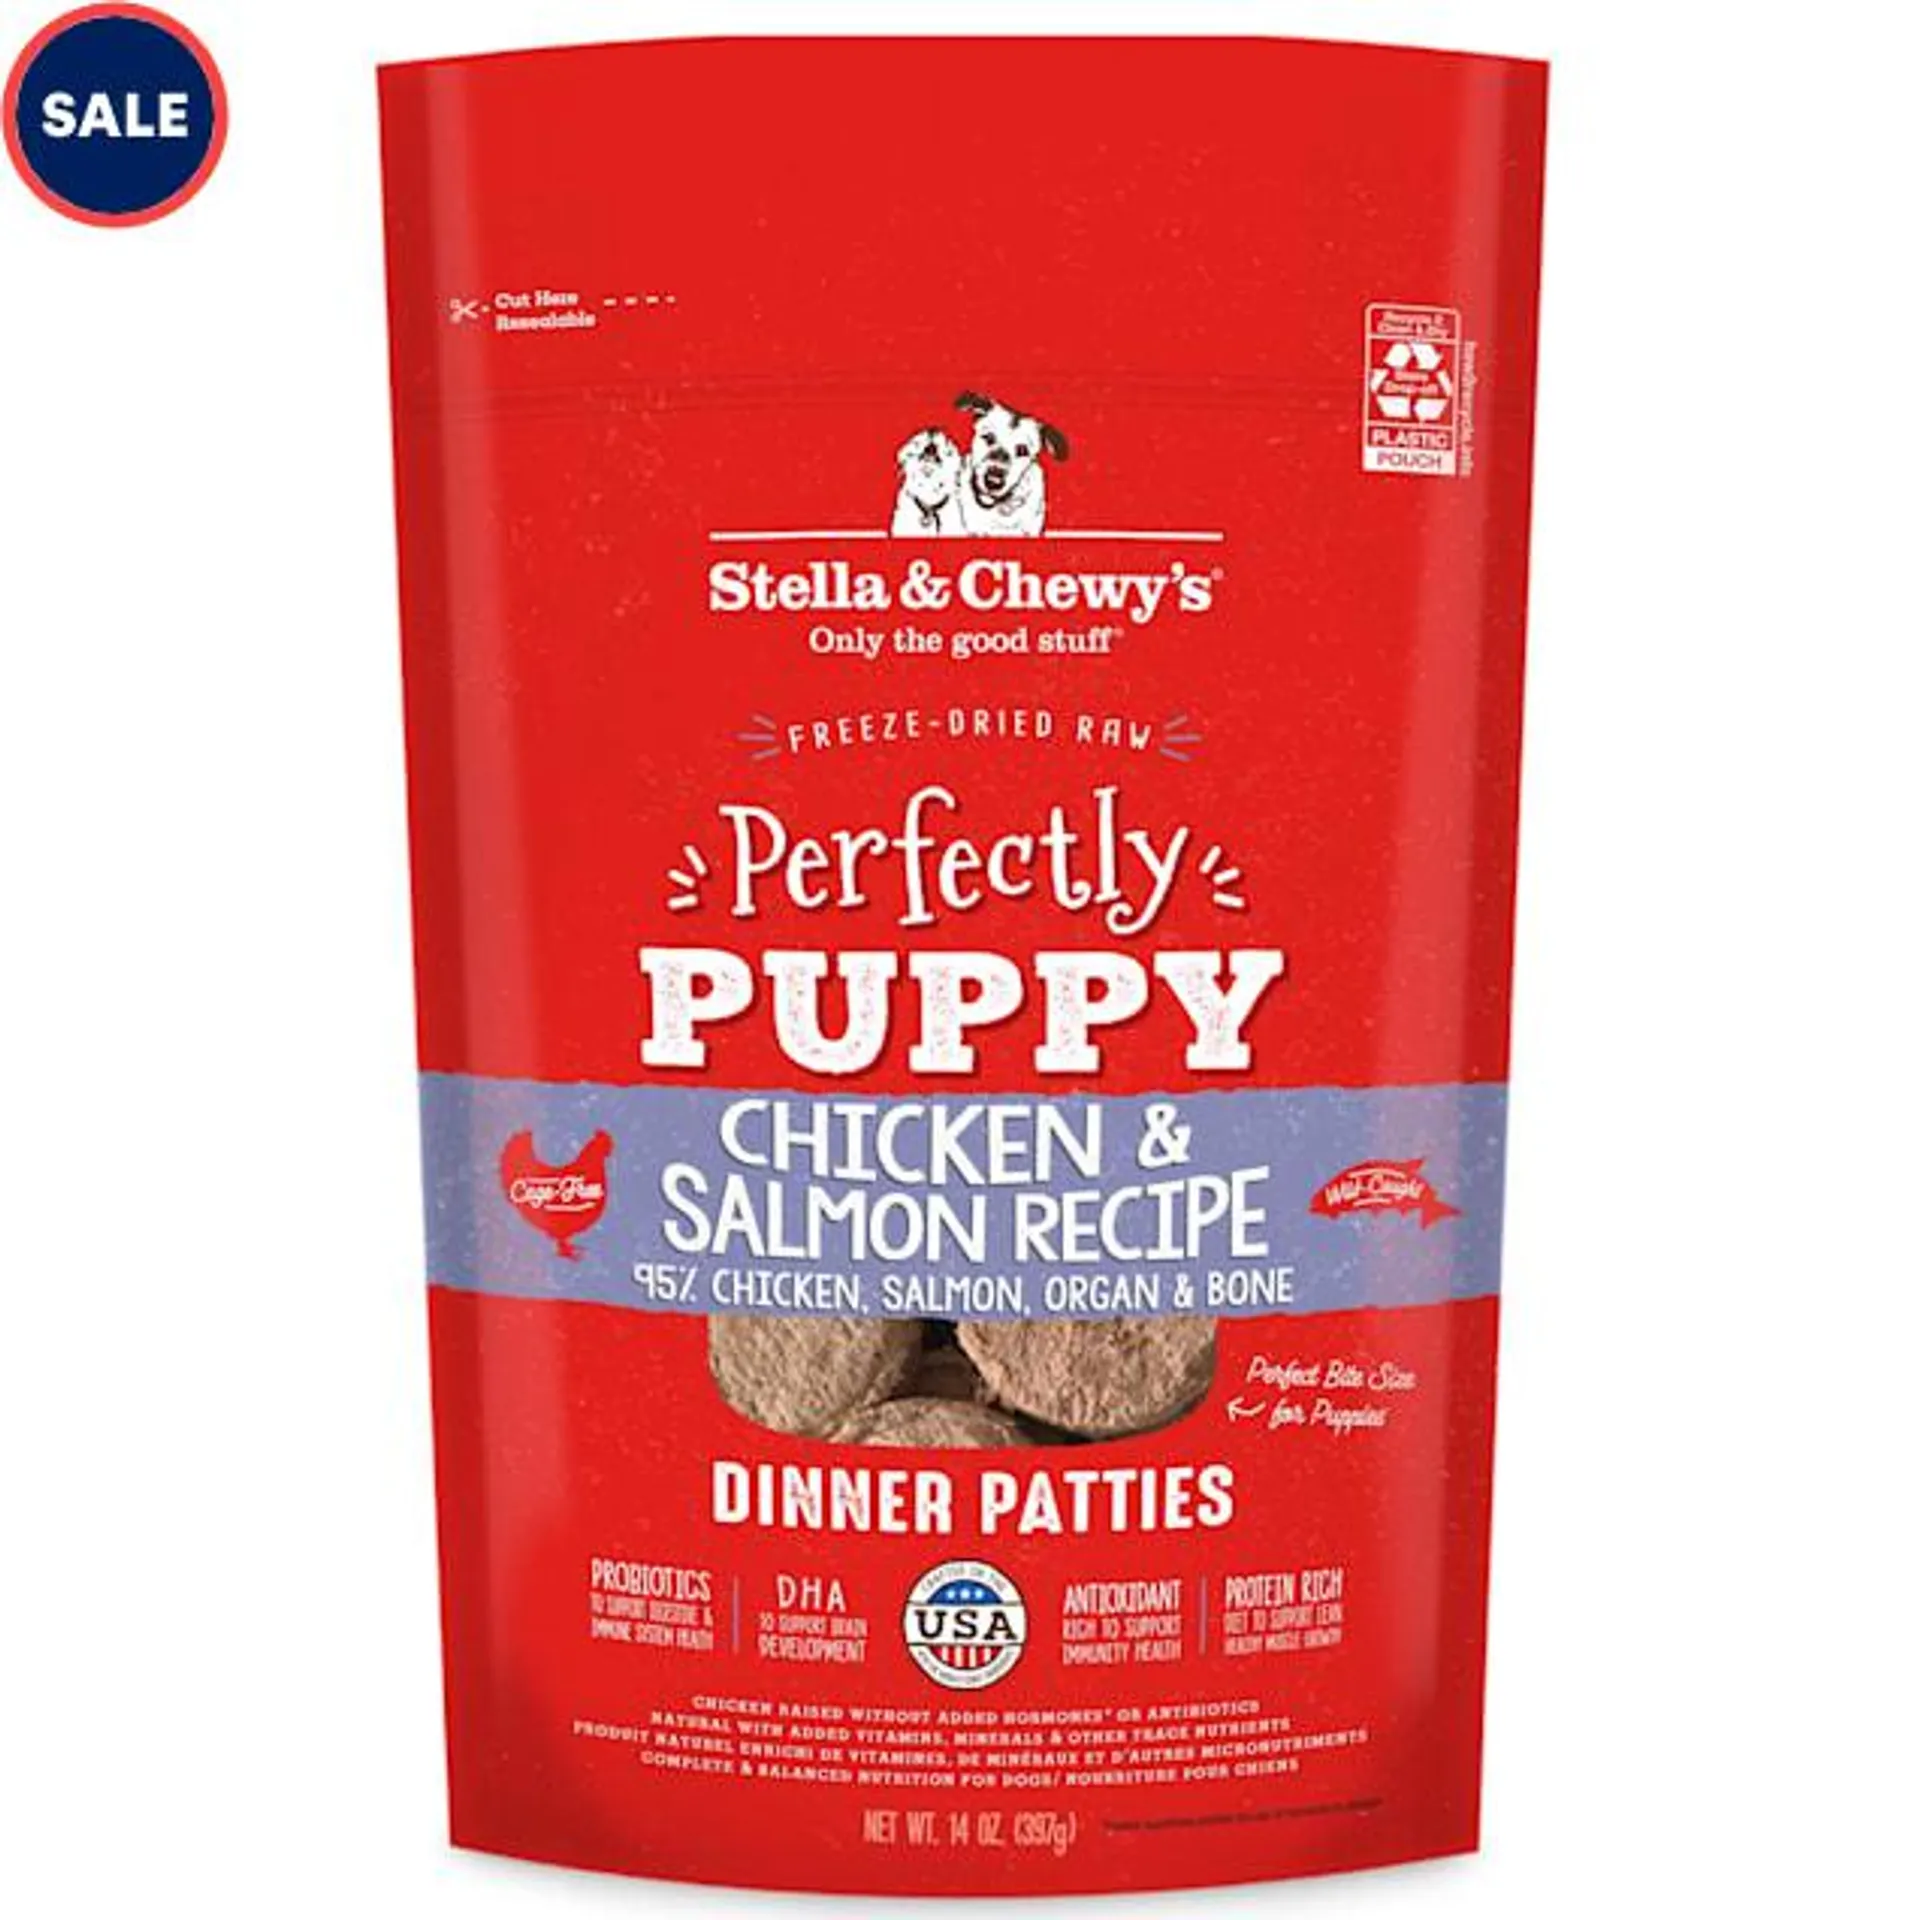 Stella & Chewy's Freeze Dried Raw Dinner Patties Protein Rich Perfectly Puppy Chicken & Salmon Recipe Dry Dog Food, 14 oz.